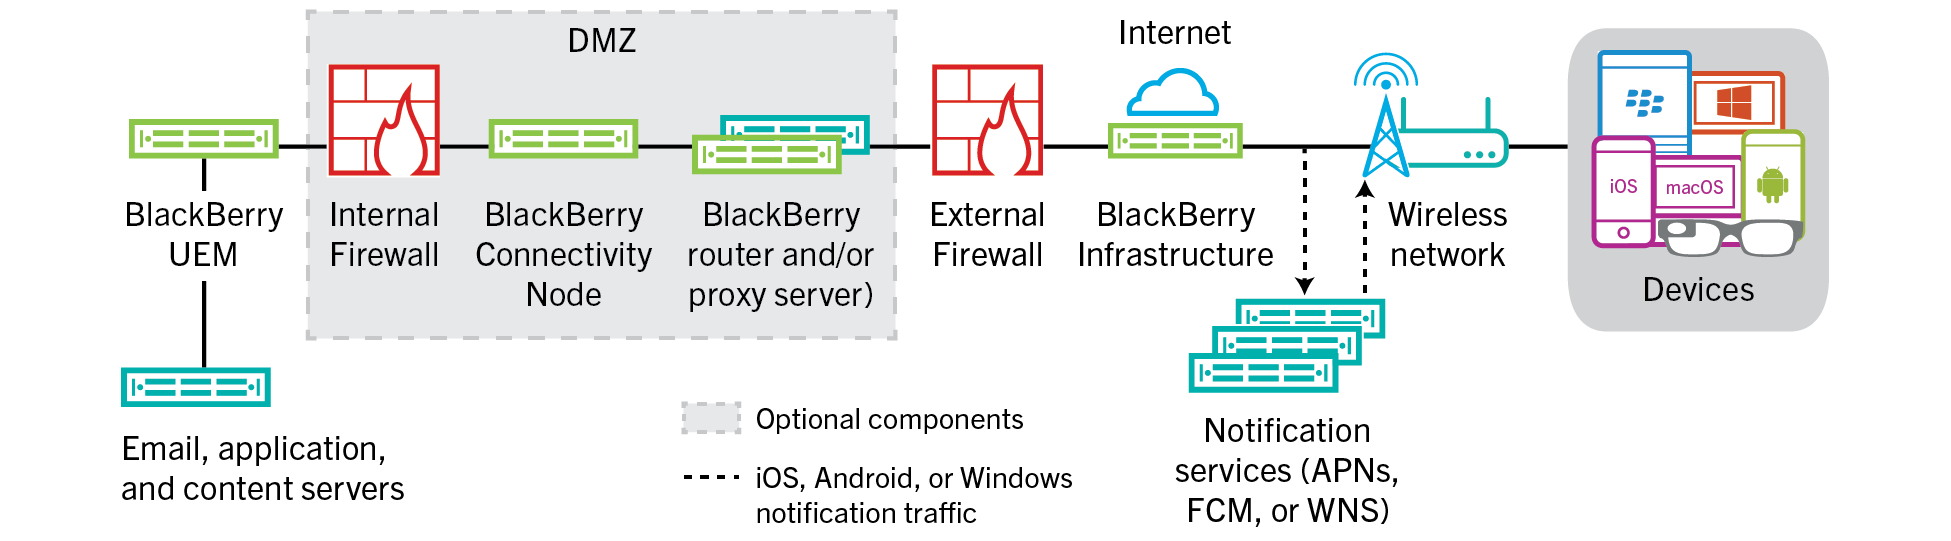 Diagram showing how devices connect to BlackBerry UEM and your organization's resources through the BlackBerry Infrastructure.